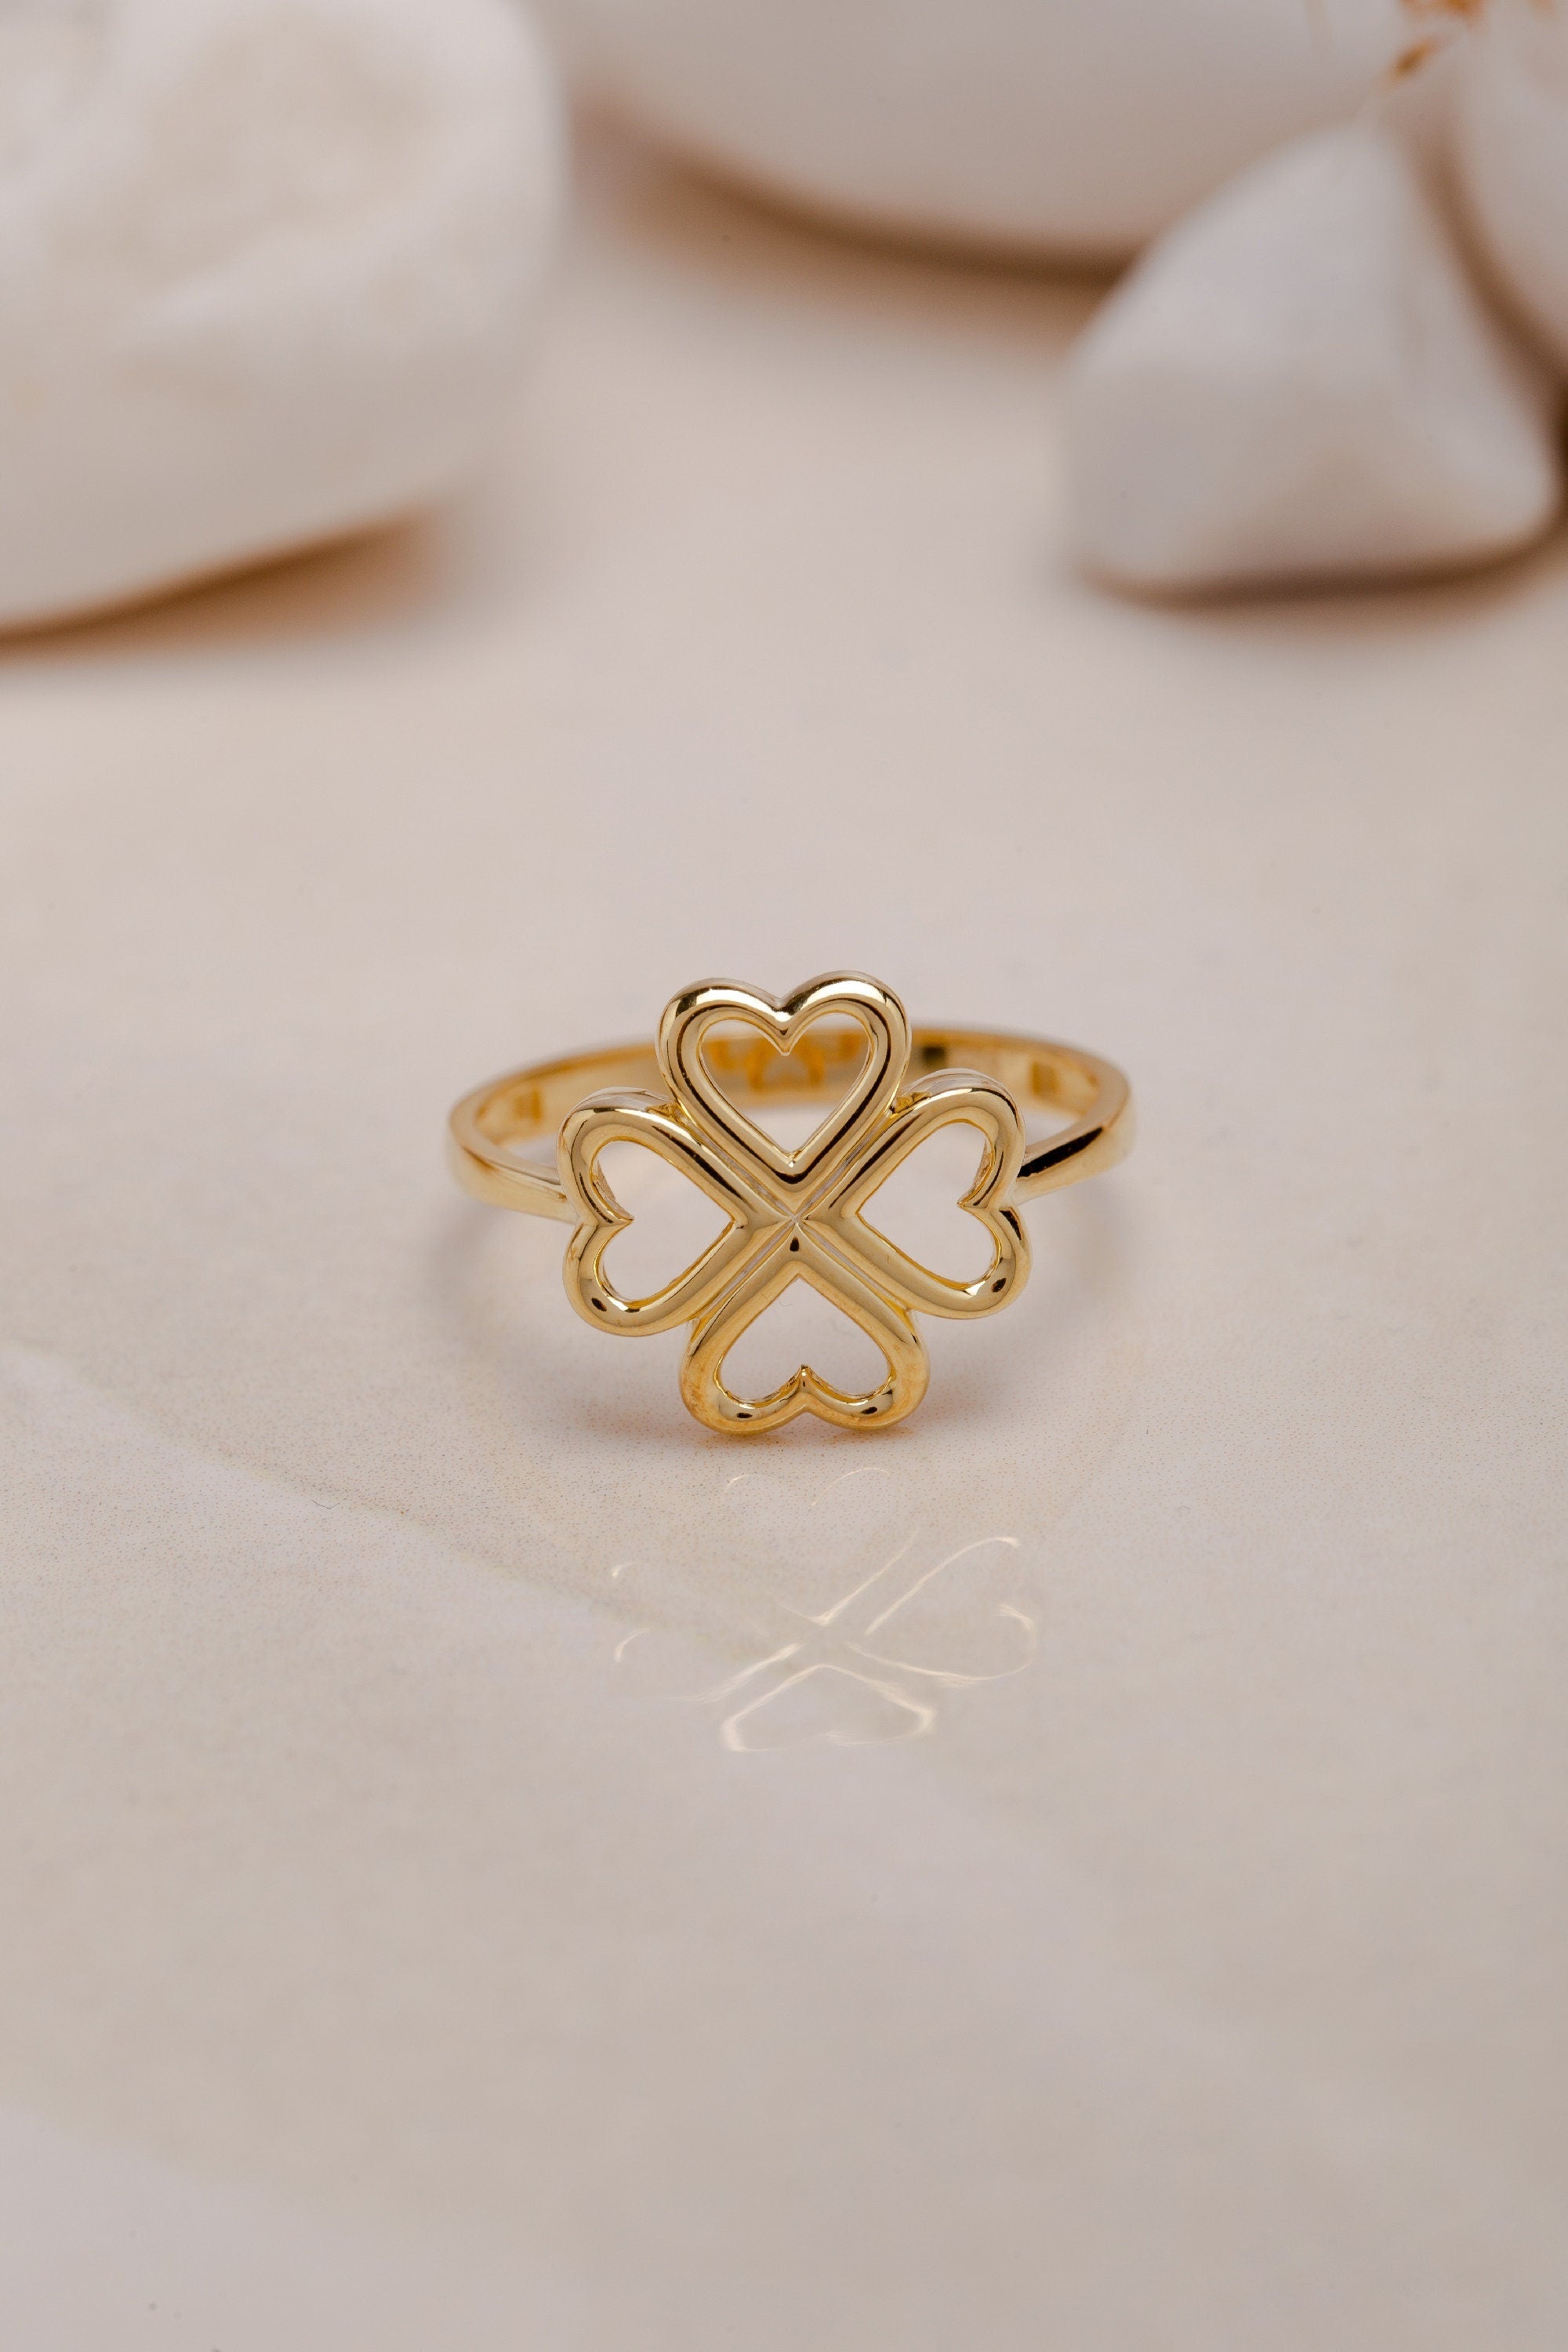 14K Tiny Clover Ring, 925 Silver Four Leaf Clover Ring, Good Luck Ring, Gift for Her, Gift For Mother Day, Mother Day Jewelry